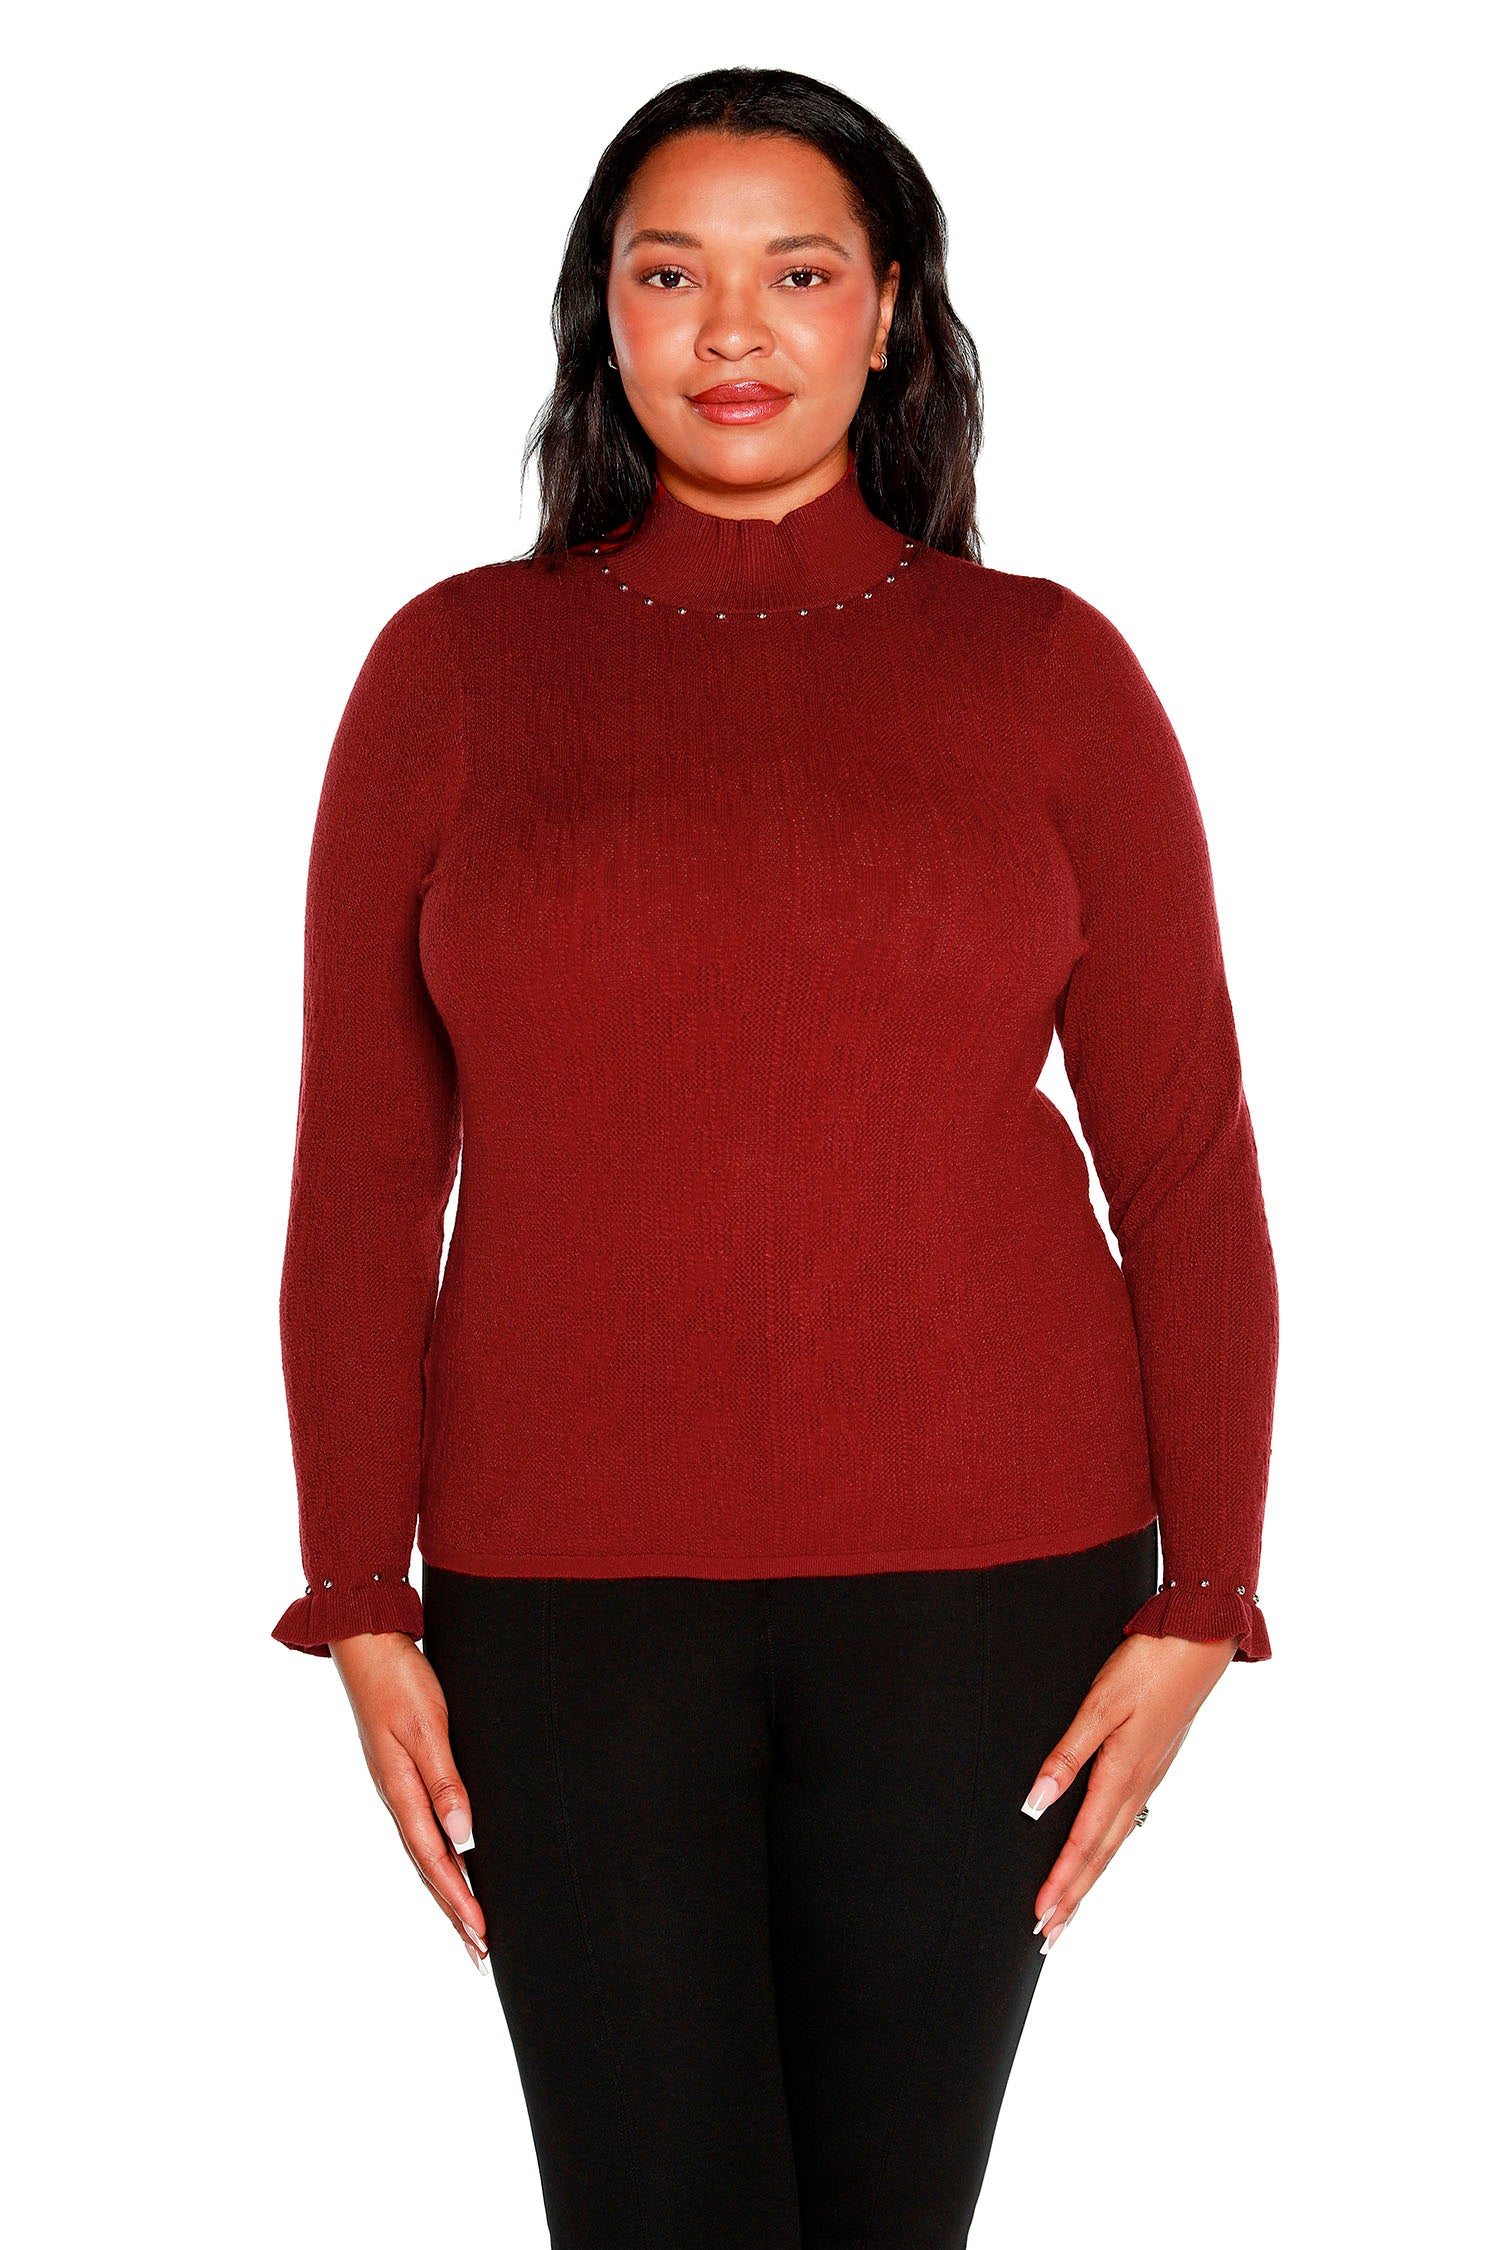 Women's Body Con Sweater with Ruffles and Nailheads | Curvy